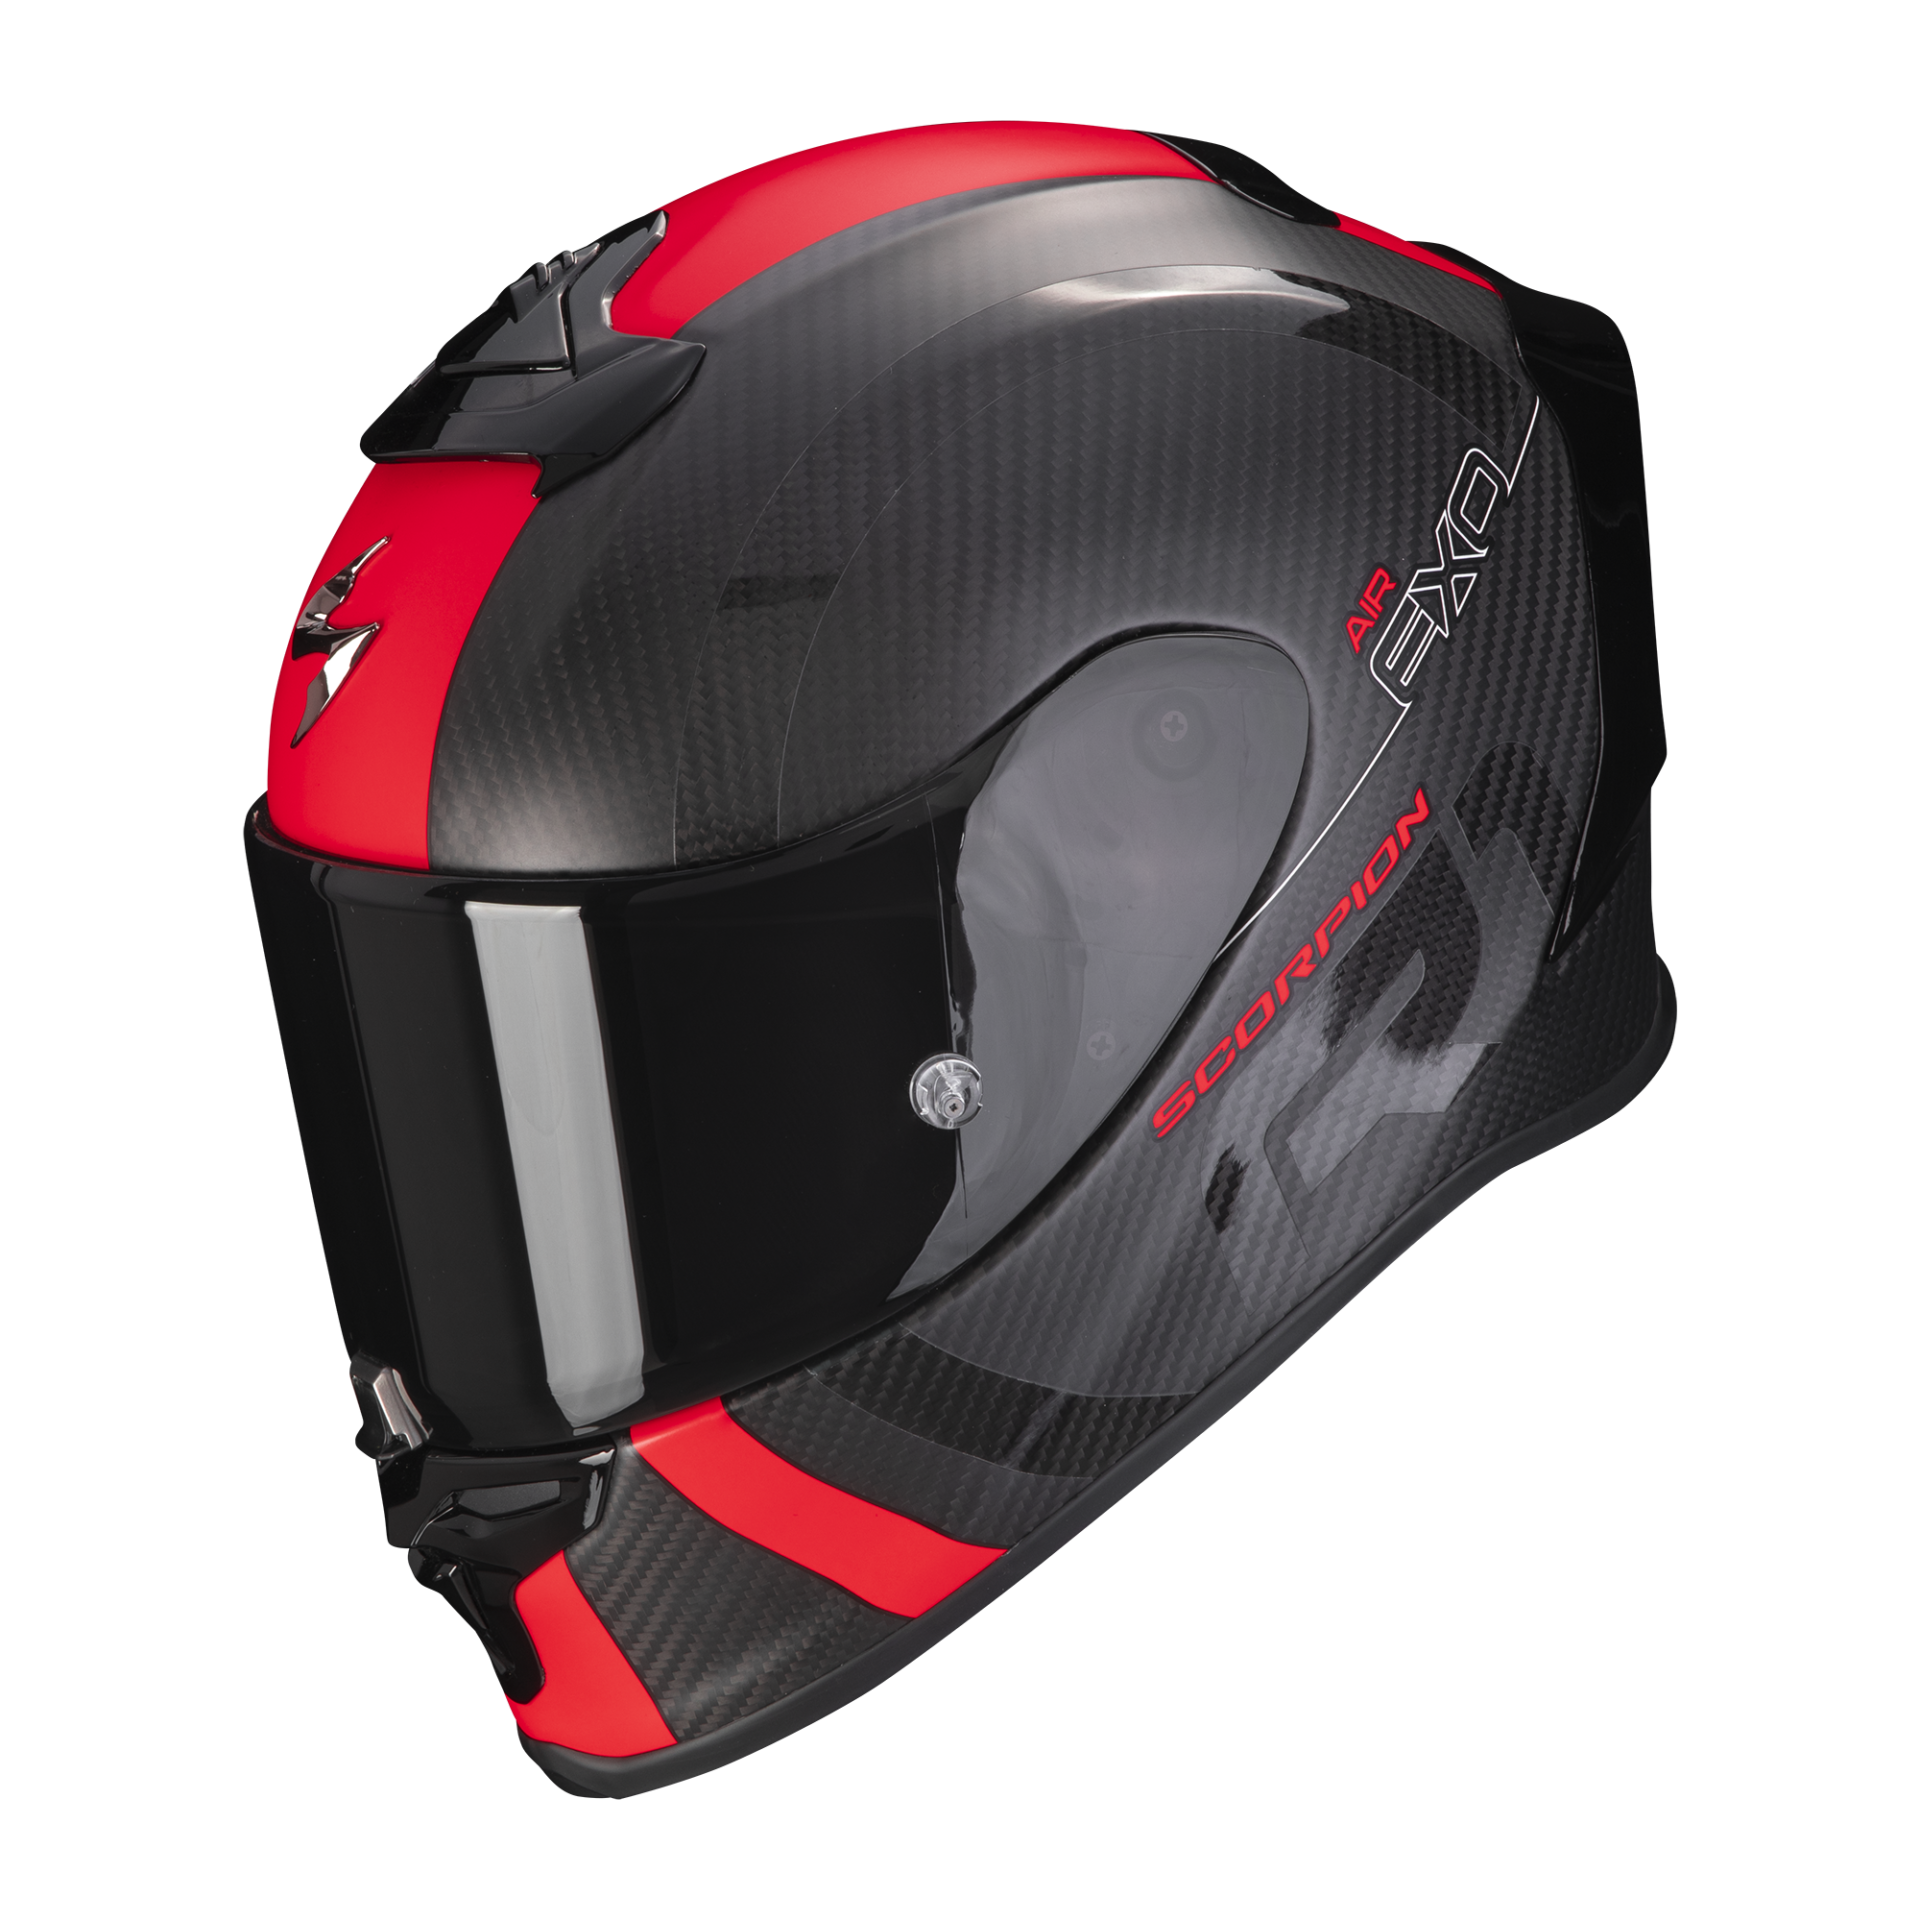 Image of EU Scorpion Exo-R1 Evo Carbon Air Mg Mat Black-Red Casque Intégral Taille XL